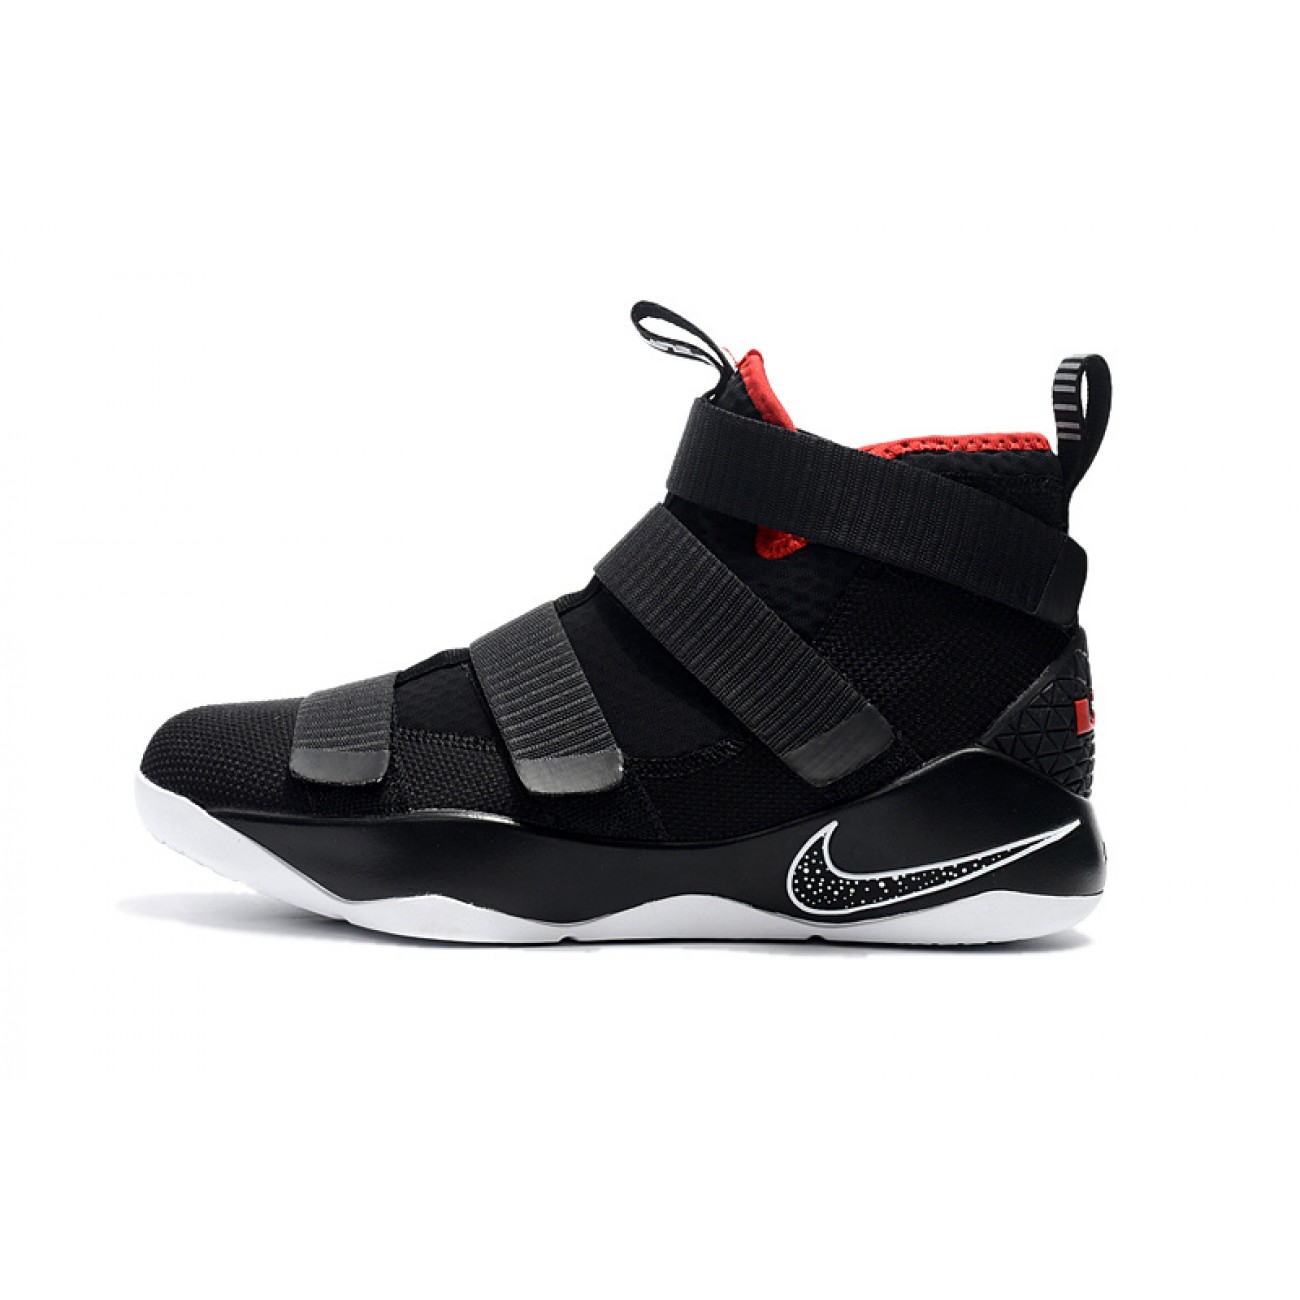 Lebron Soldier 11 "Bred" Black/Red